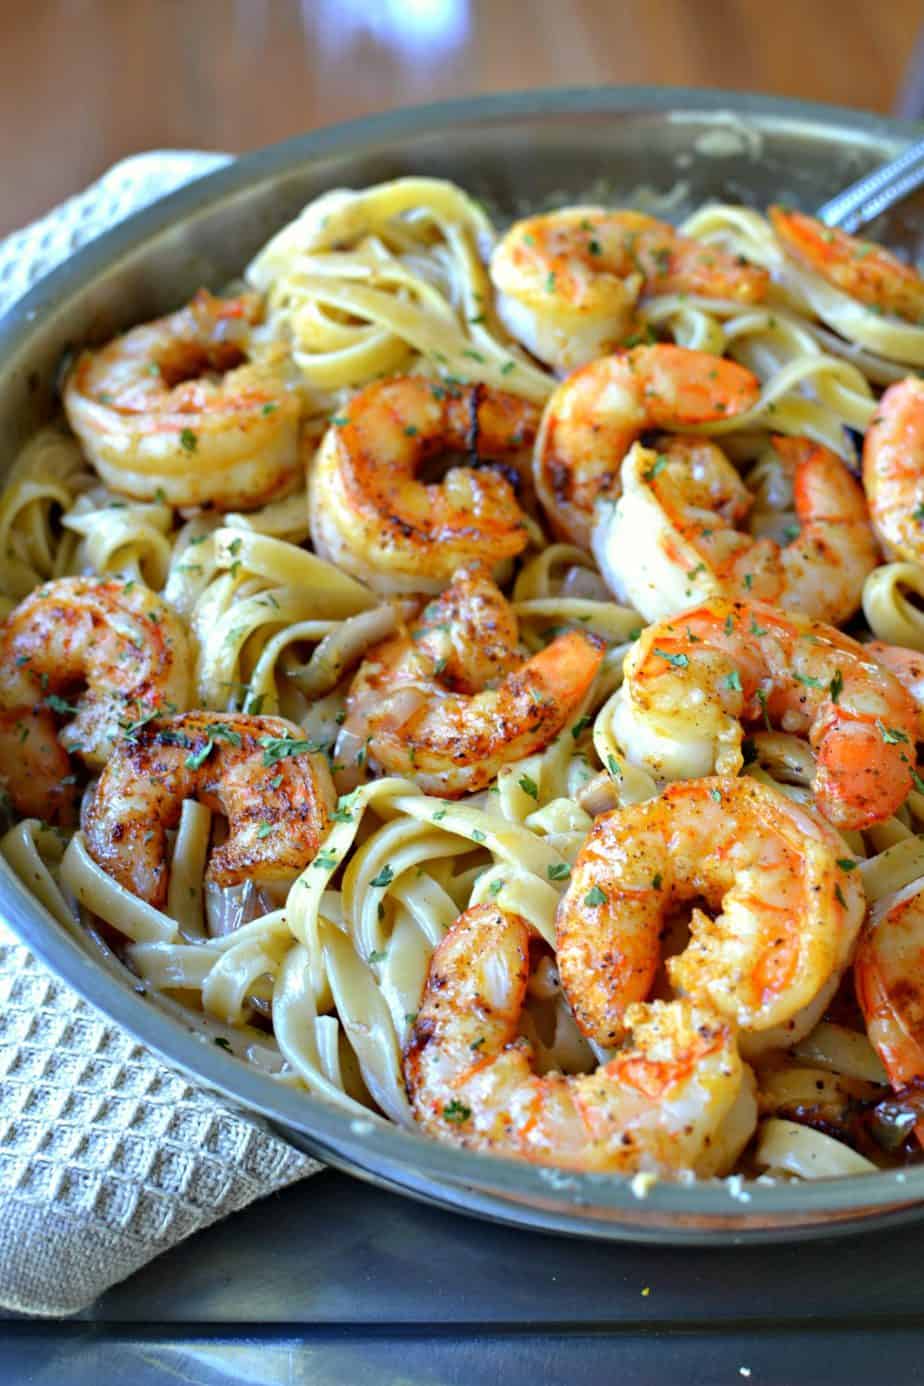 This Cajun Shrimp Pasta is easy enough for even the novice cook.